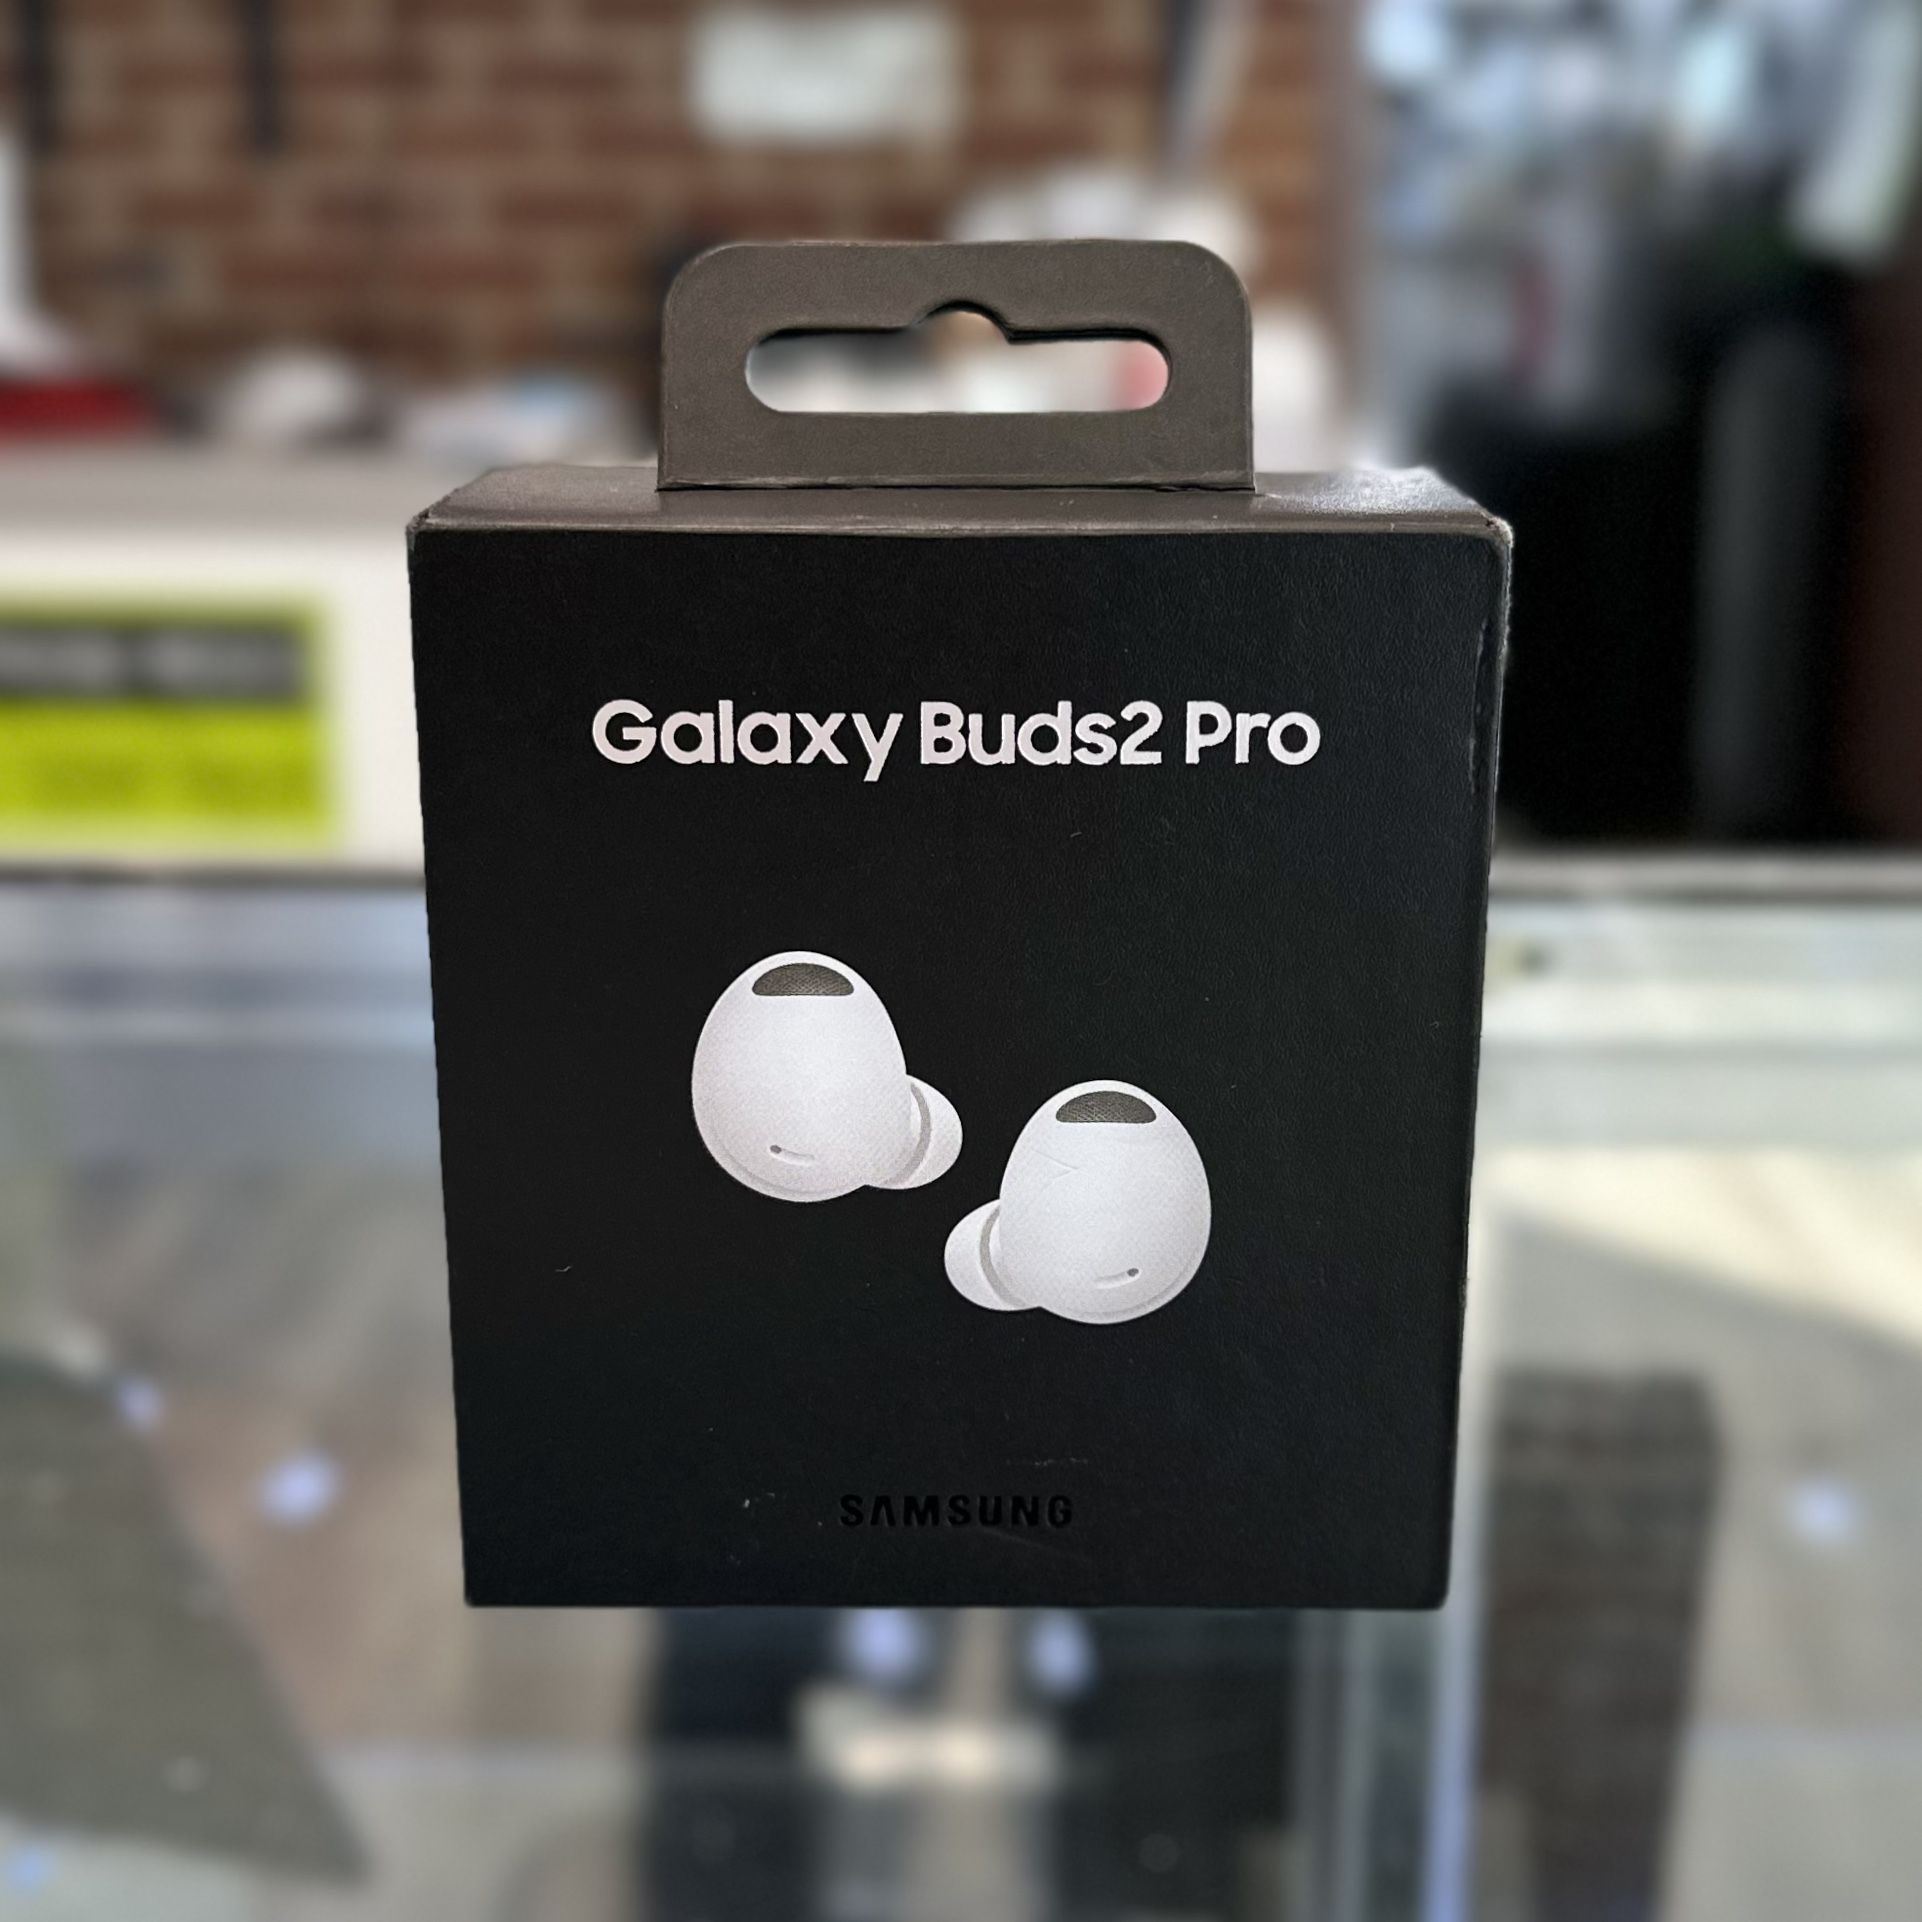 Samsung Galaxy Buds 2 Pro (payments/trade optional)